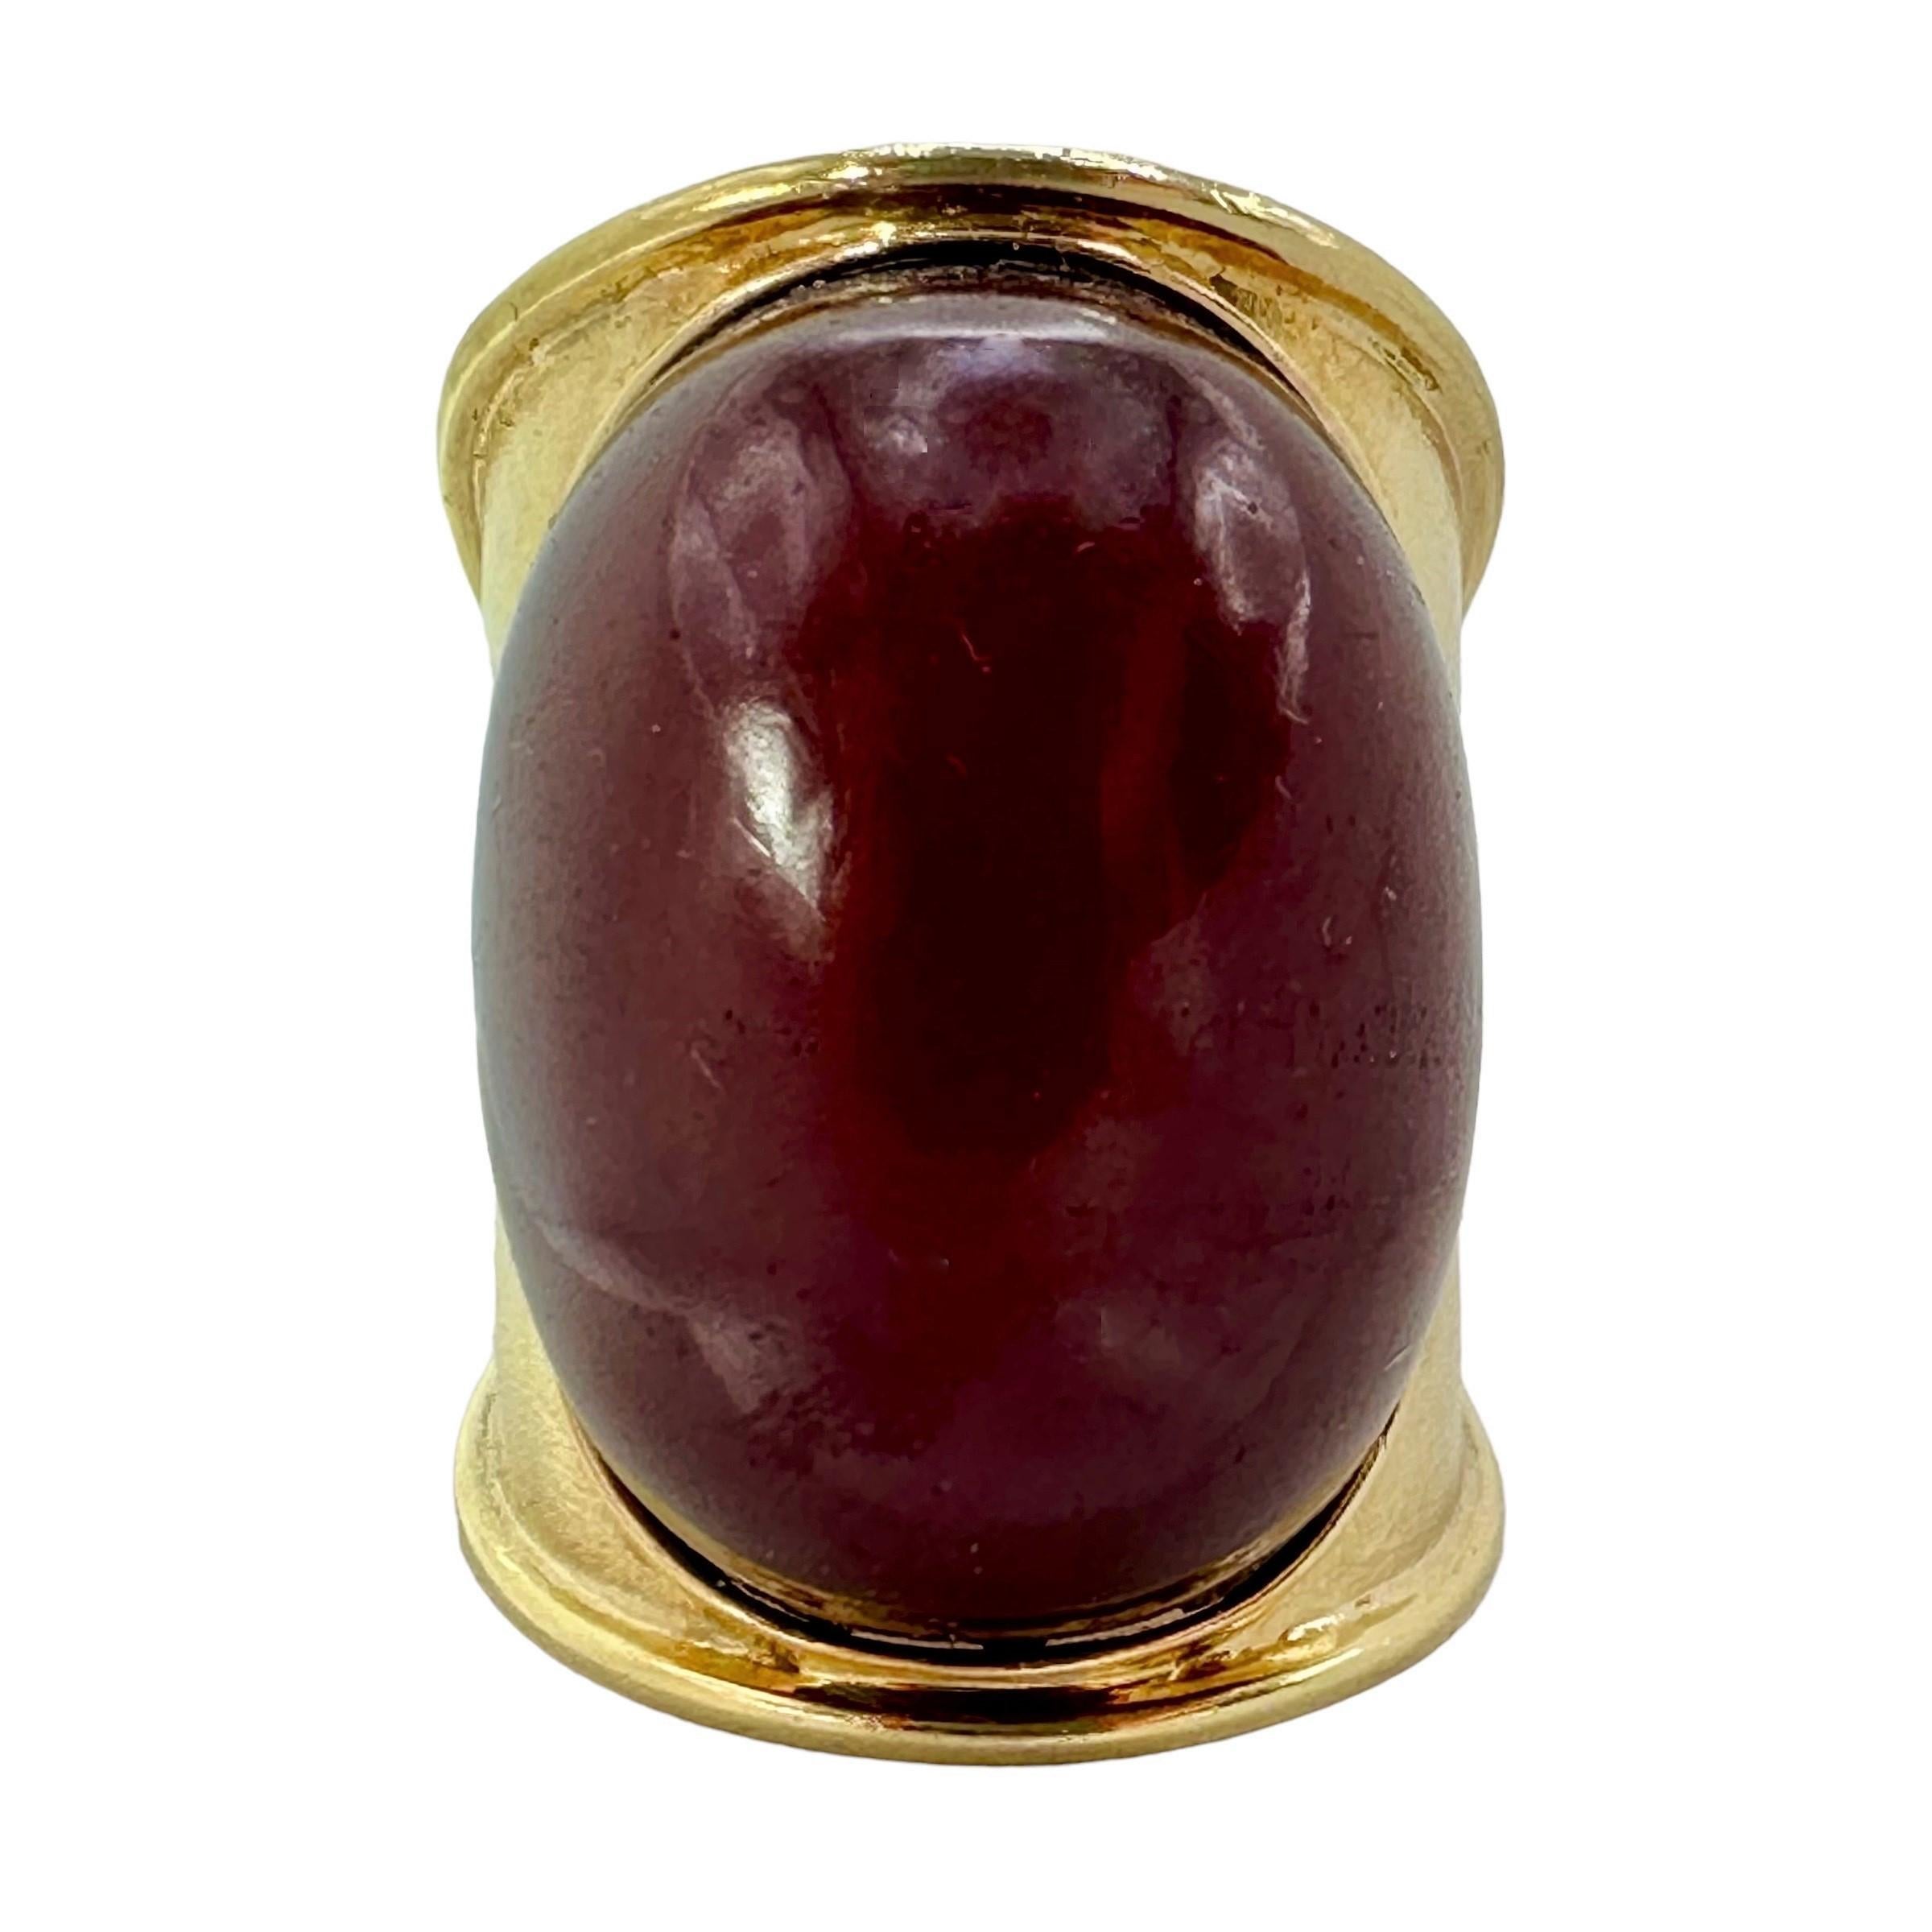 This unusual vintage ring is crafted from 18K yellow gold with a richly textured surface. It is set with one massive amber bead, which measures a full 1 1/8 inch in length with a girth of over 3/4 inch. The bead is a rich, reddish-bronze  color. The